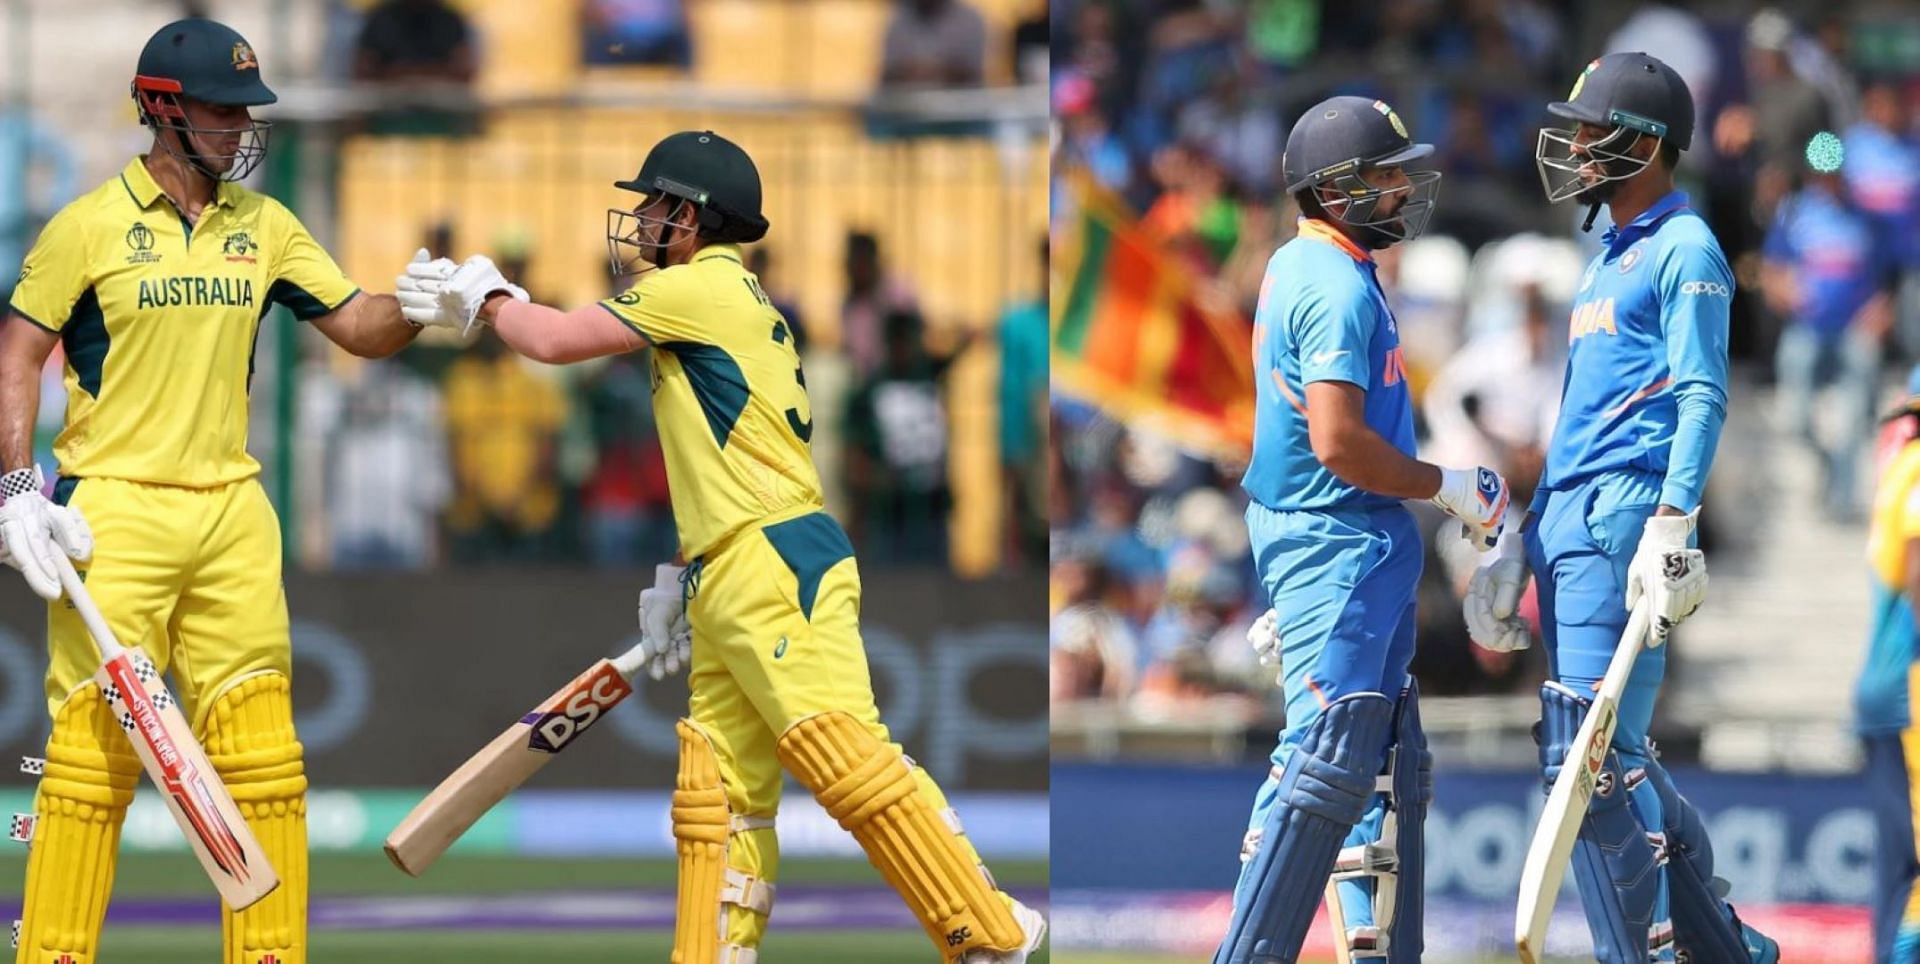 The Australian openers achieved the rare feat of scoring centuries in the same World Cup game